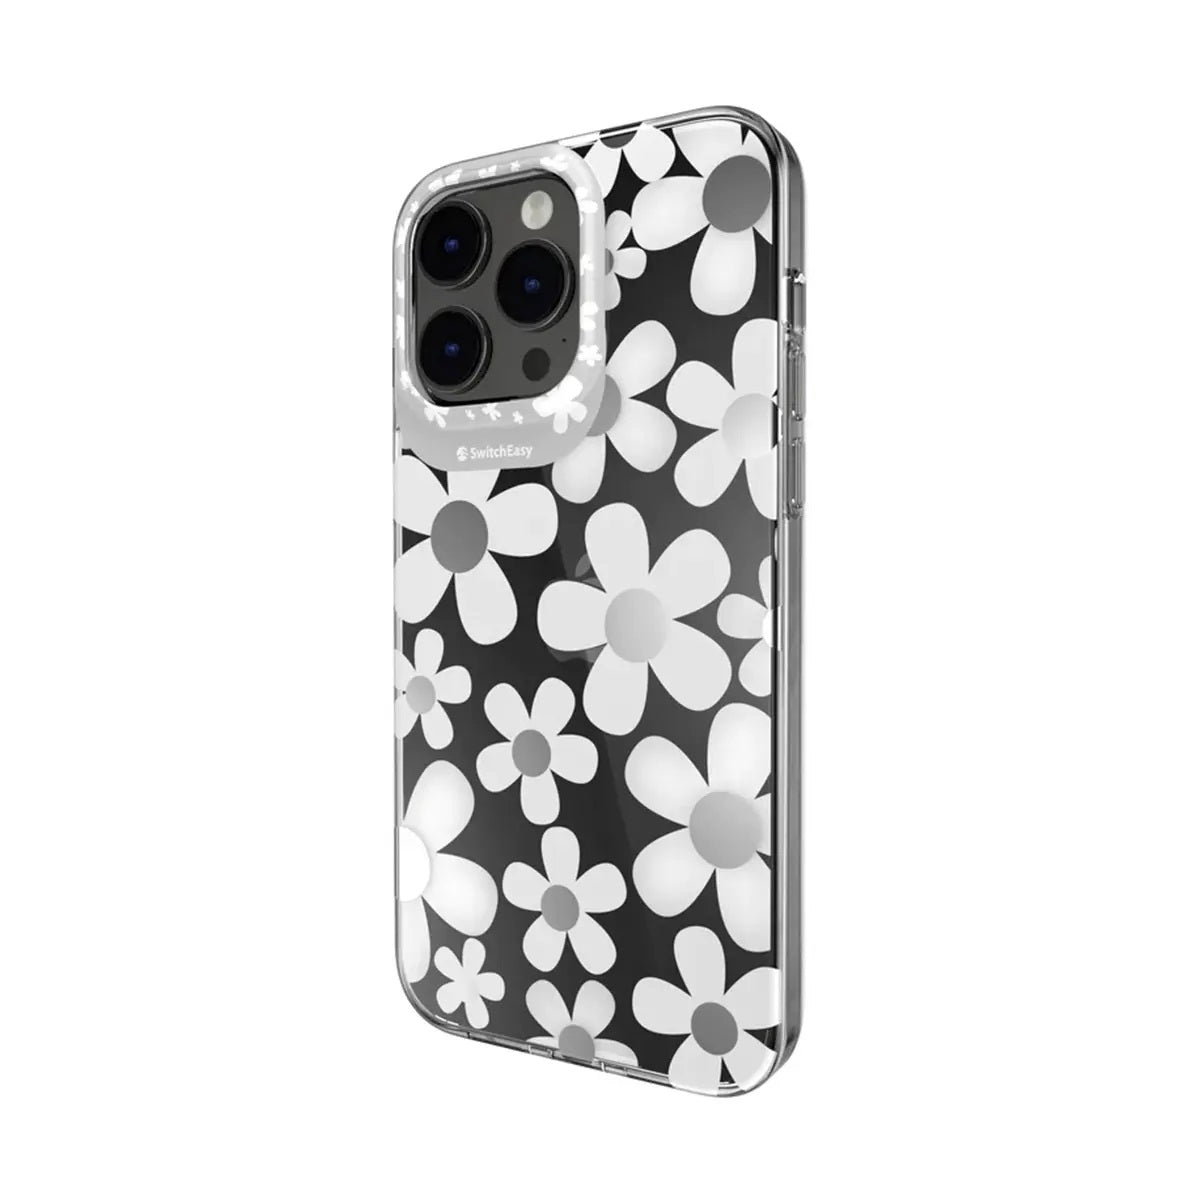 SwitchEasy Artist Double In-Mold Decoration Case for iPhone 14 Series (Fleur)